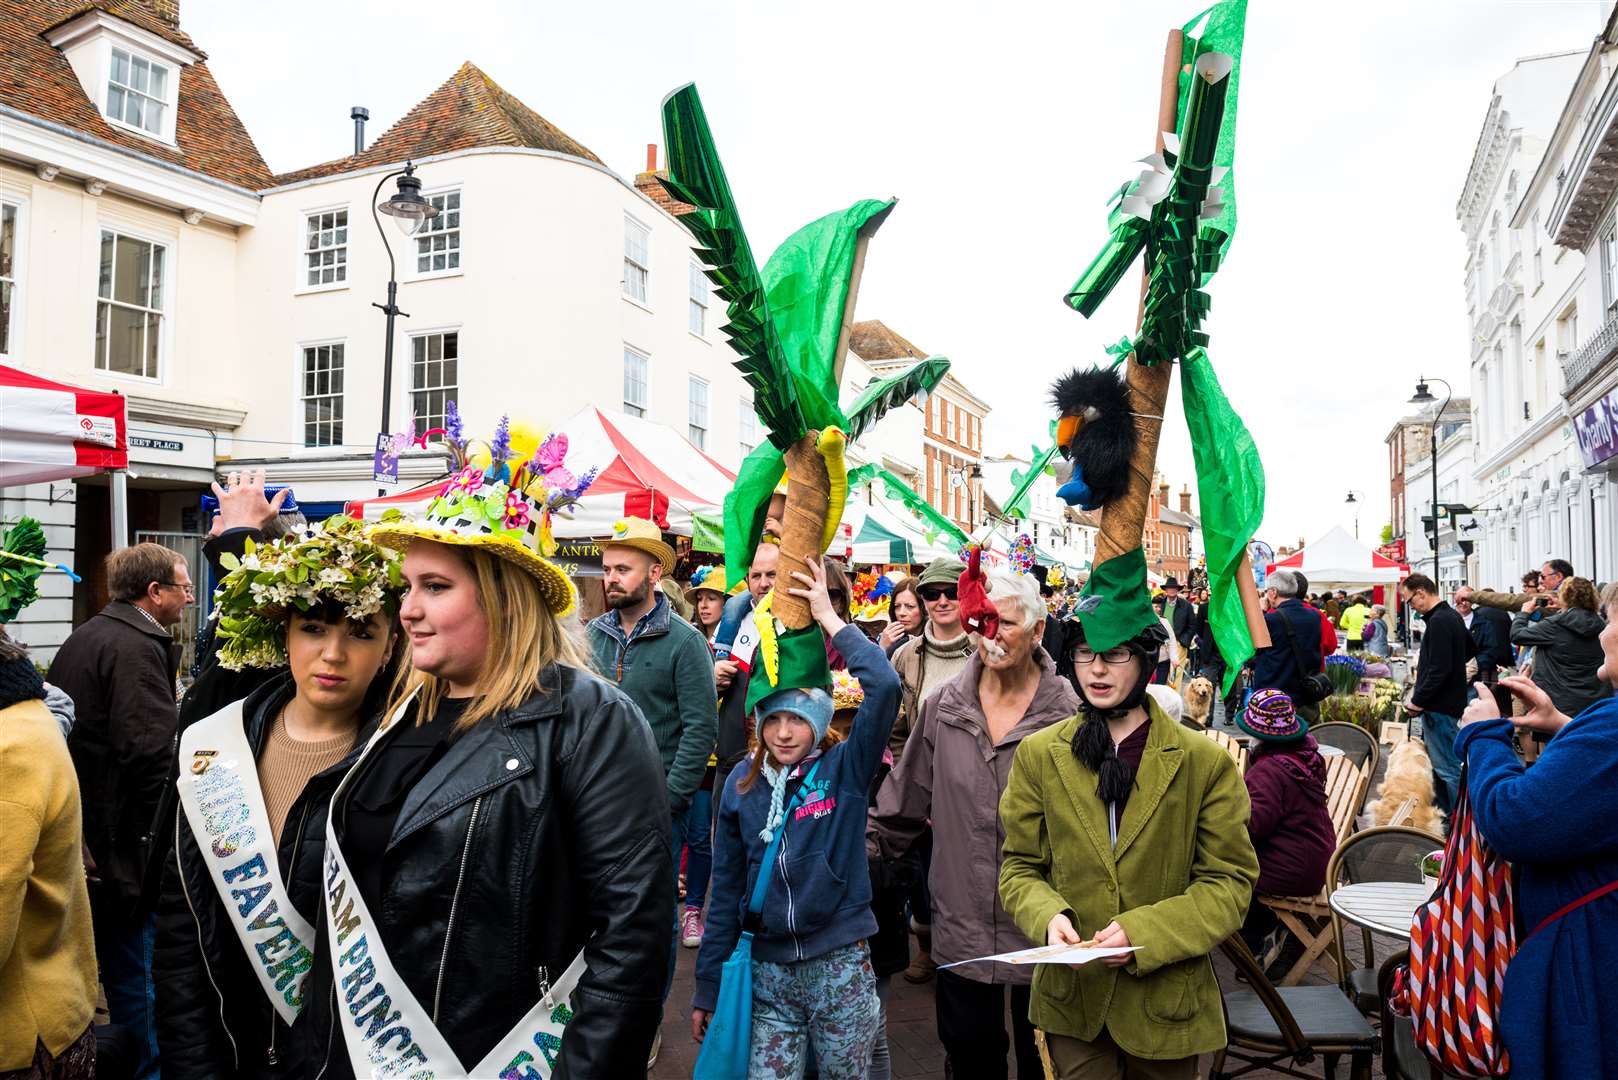 Hundreds are expected to turn out for the hat festival and parade